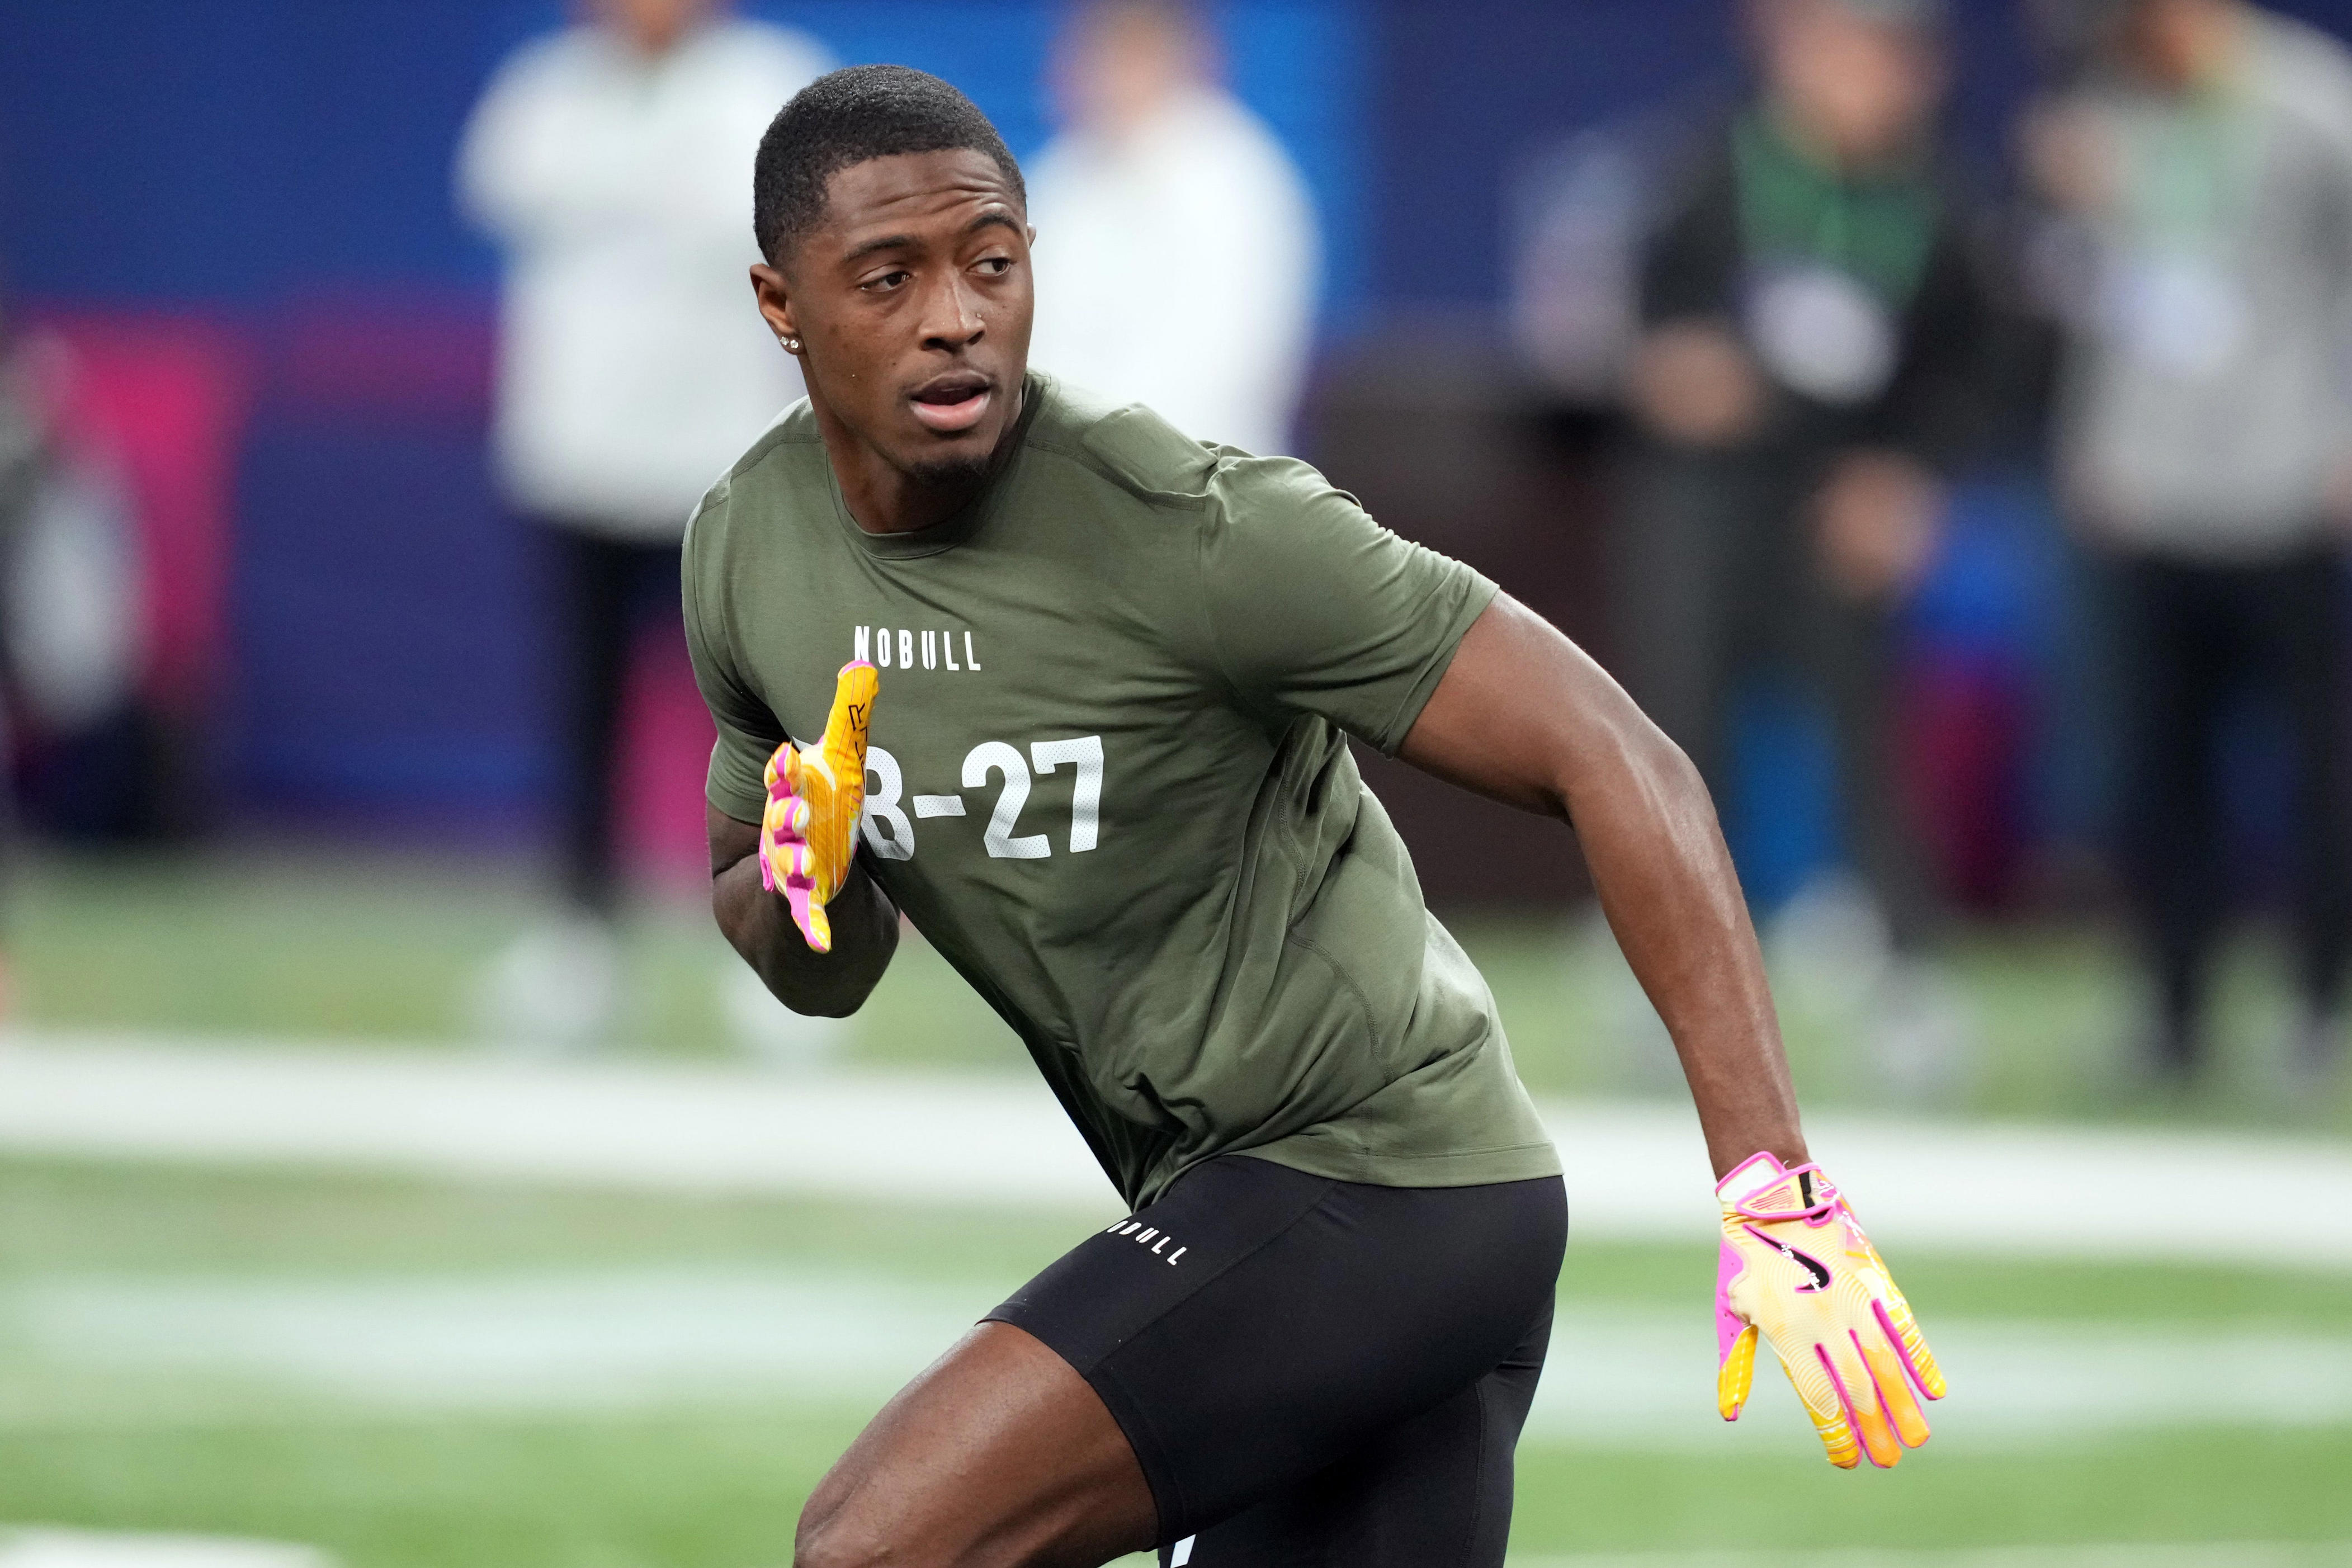 2024 nfl mock draft roundup: who are the philadelphia eagles taking in the nfl draft?